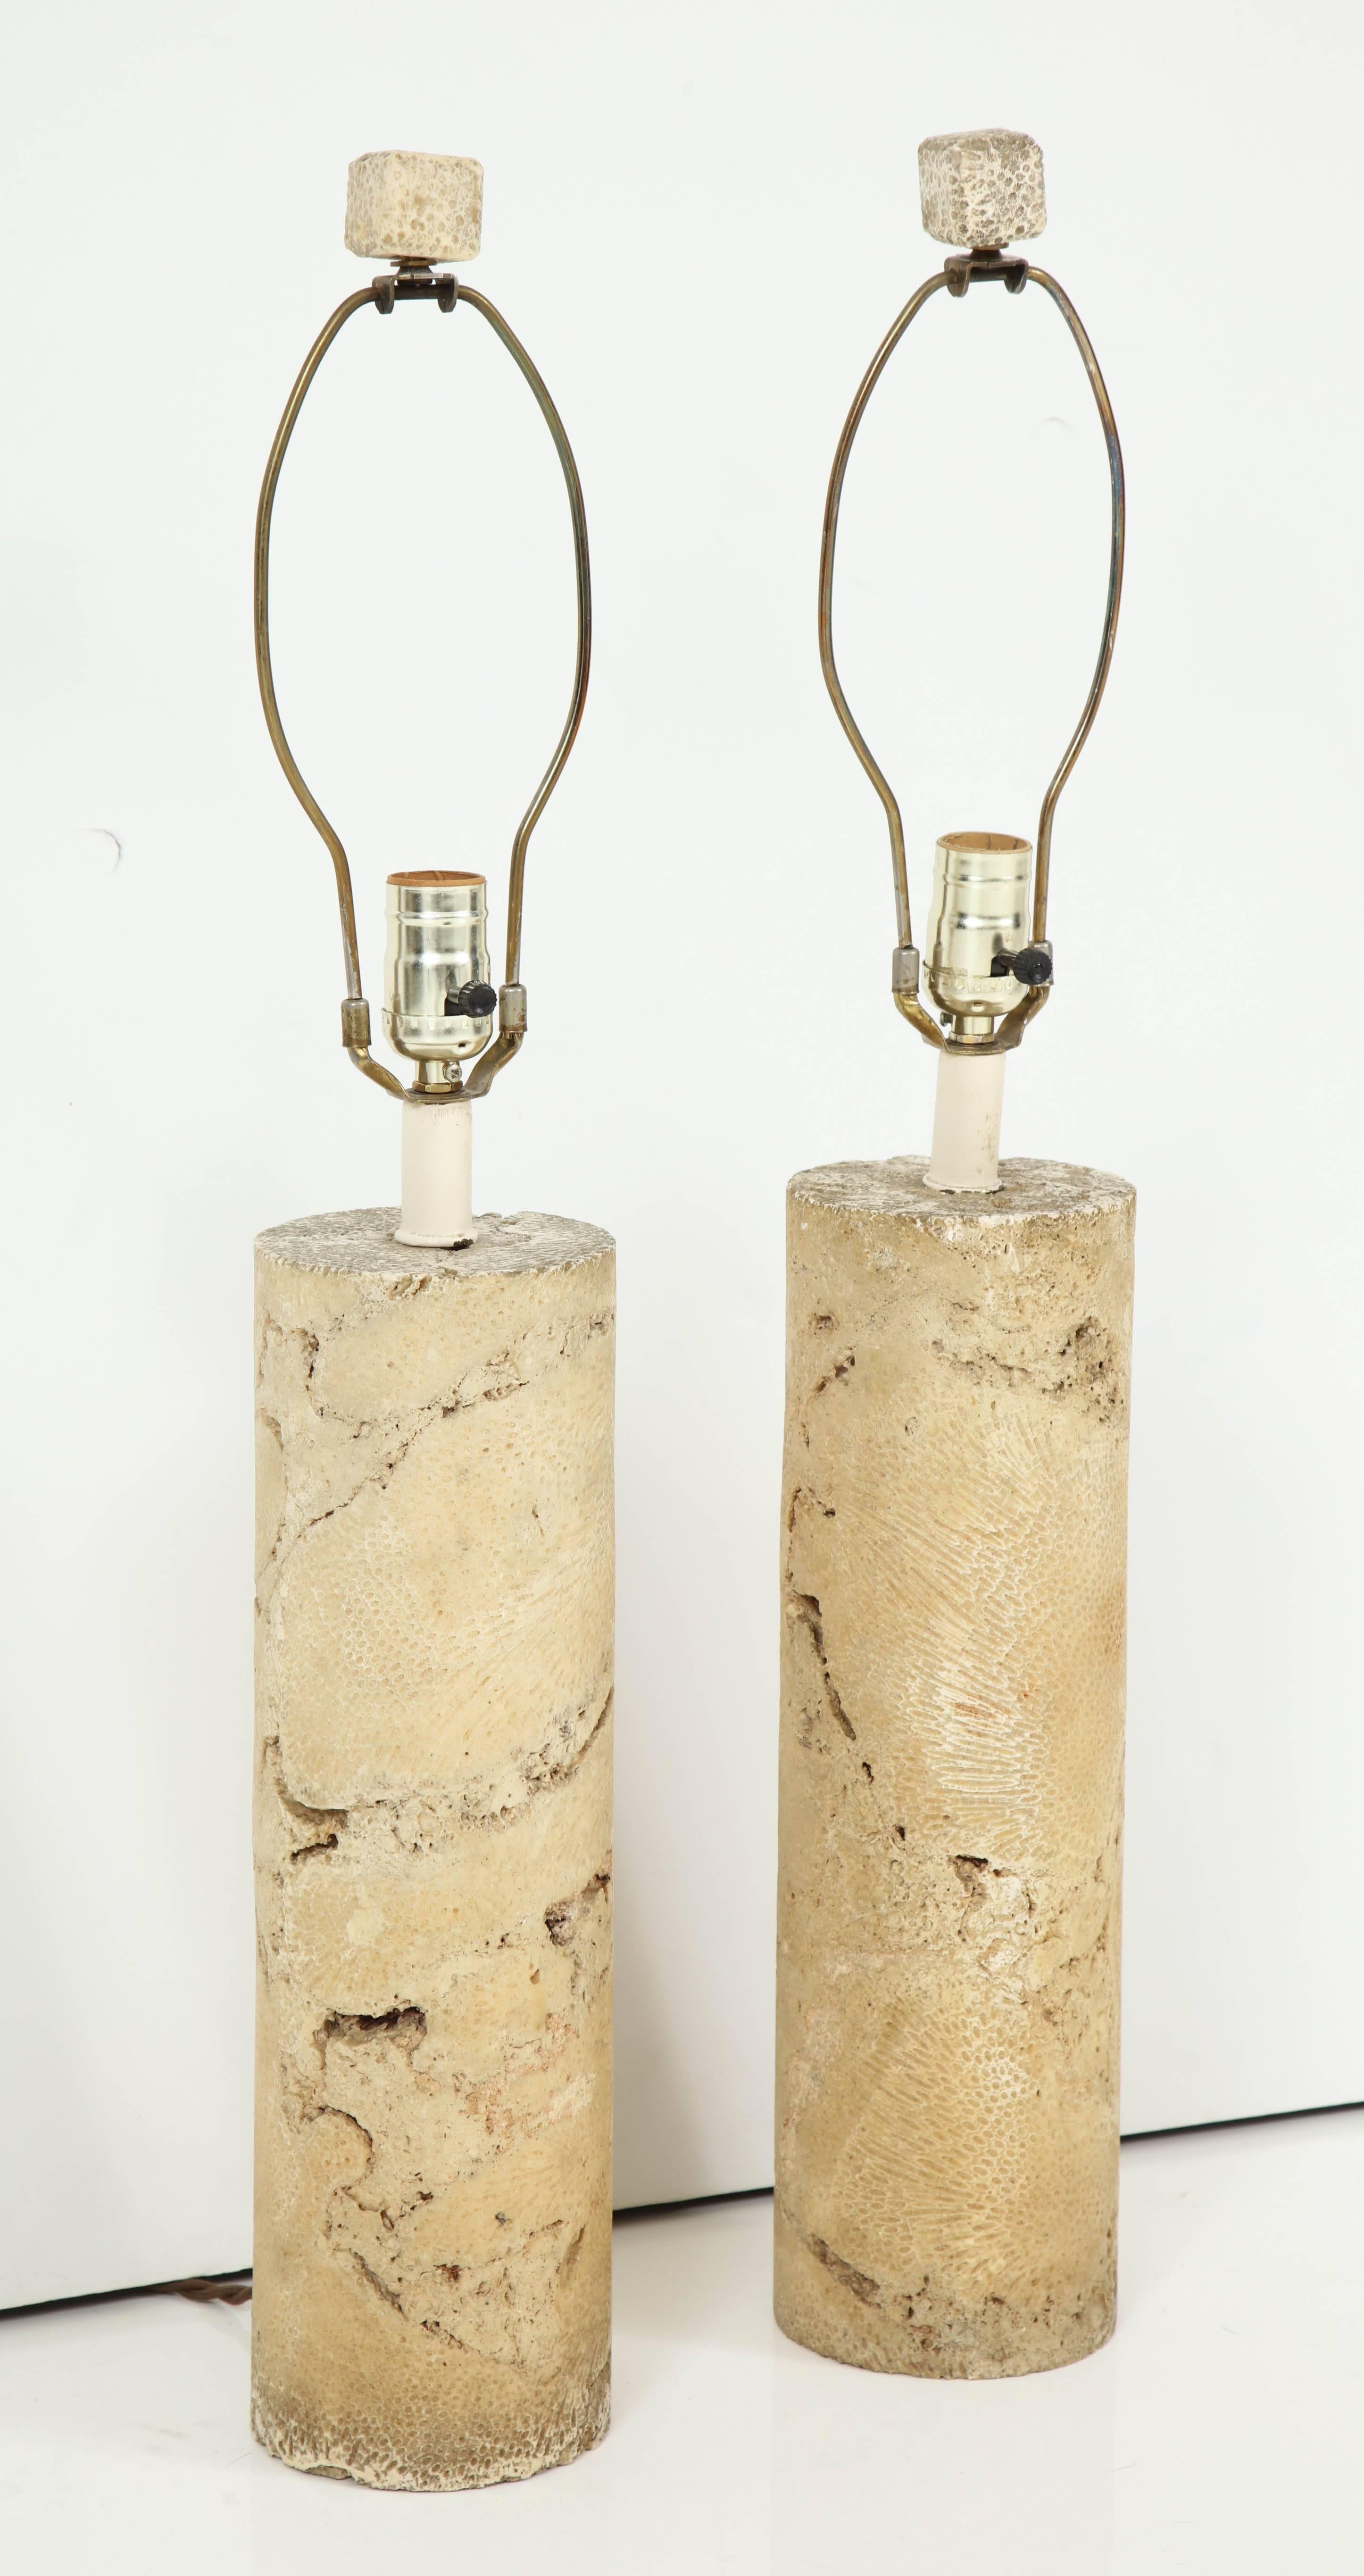 Elegant pair of solid fossil coral lamps, USA, 1960s, rewired and retain their solid coral finials. Custom shades available. Price is for the pair.